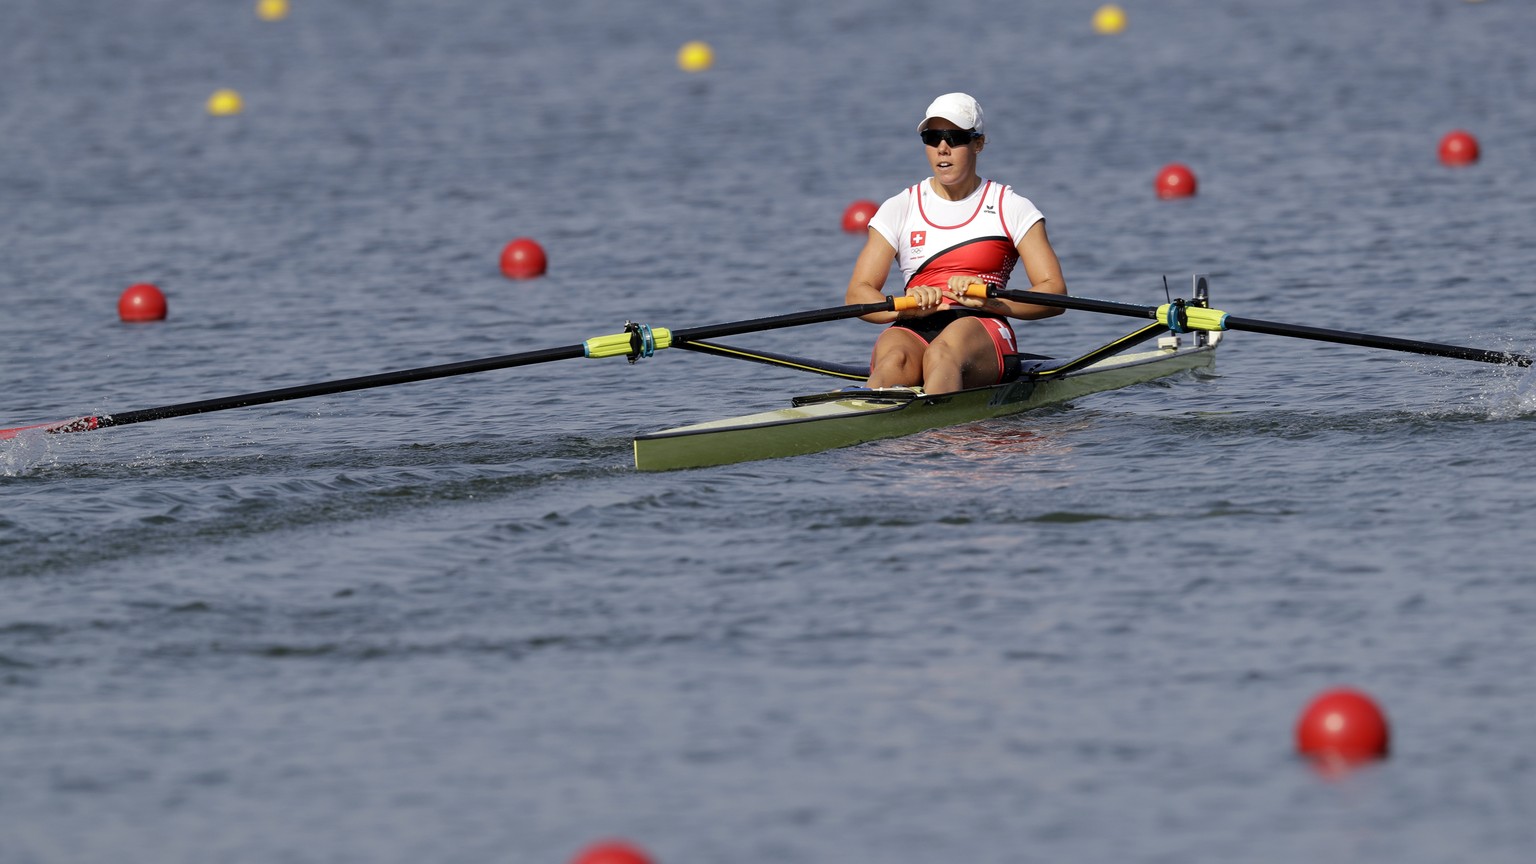 Jeanine Gmelin, of Switzerland, competes in the women&#039;s rowing single sculls quarterfinal heats during the 2016 Summer Olympics in Rio de Janeiro, Brazil, Tuesday, Aug. 9, 2016. (AP Photo/Luca Br ...